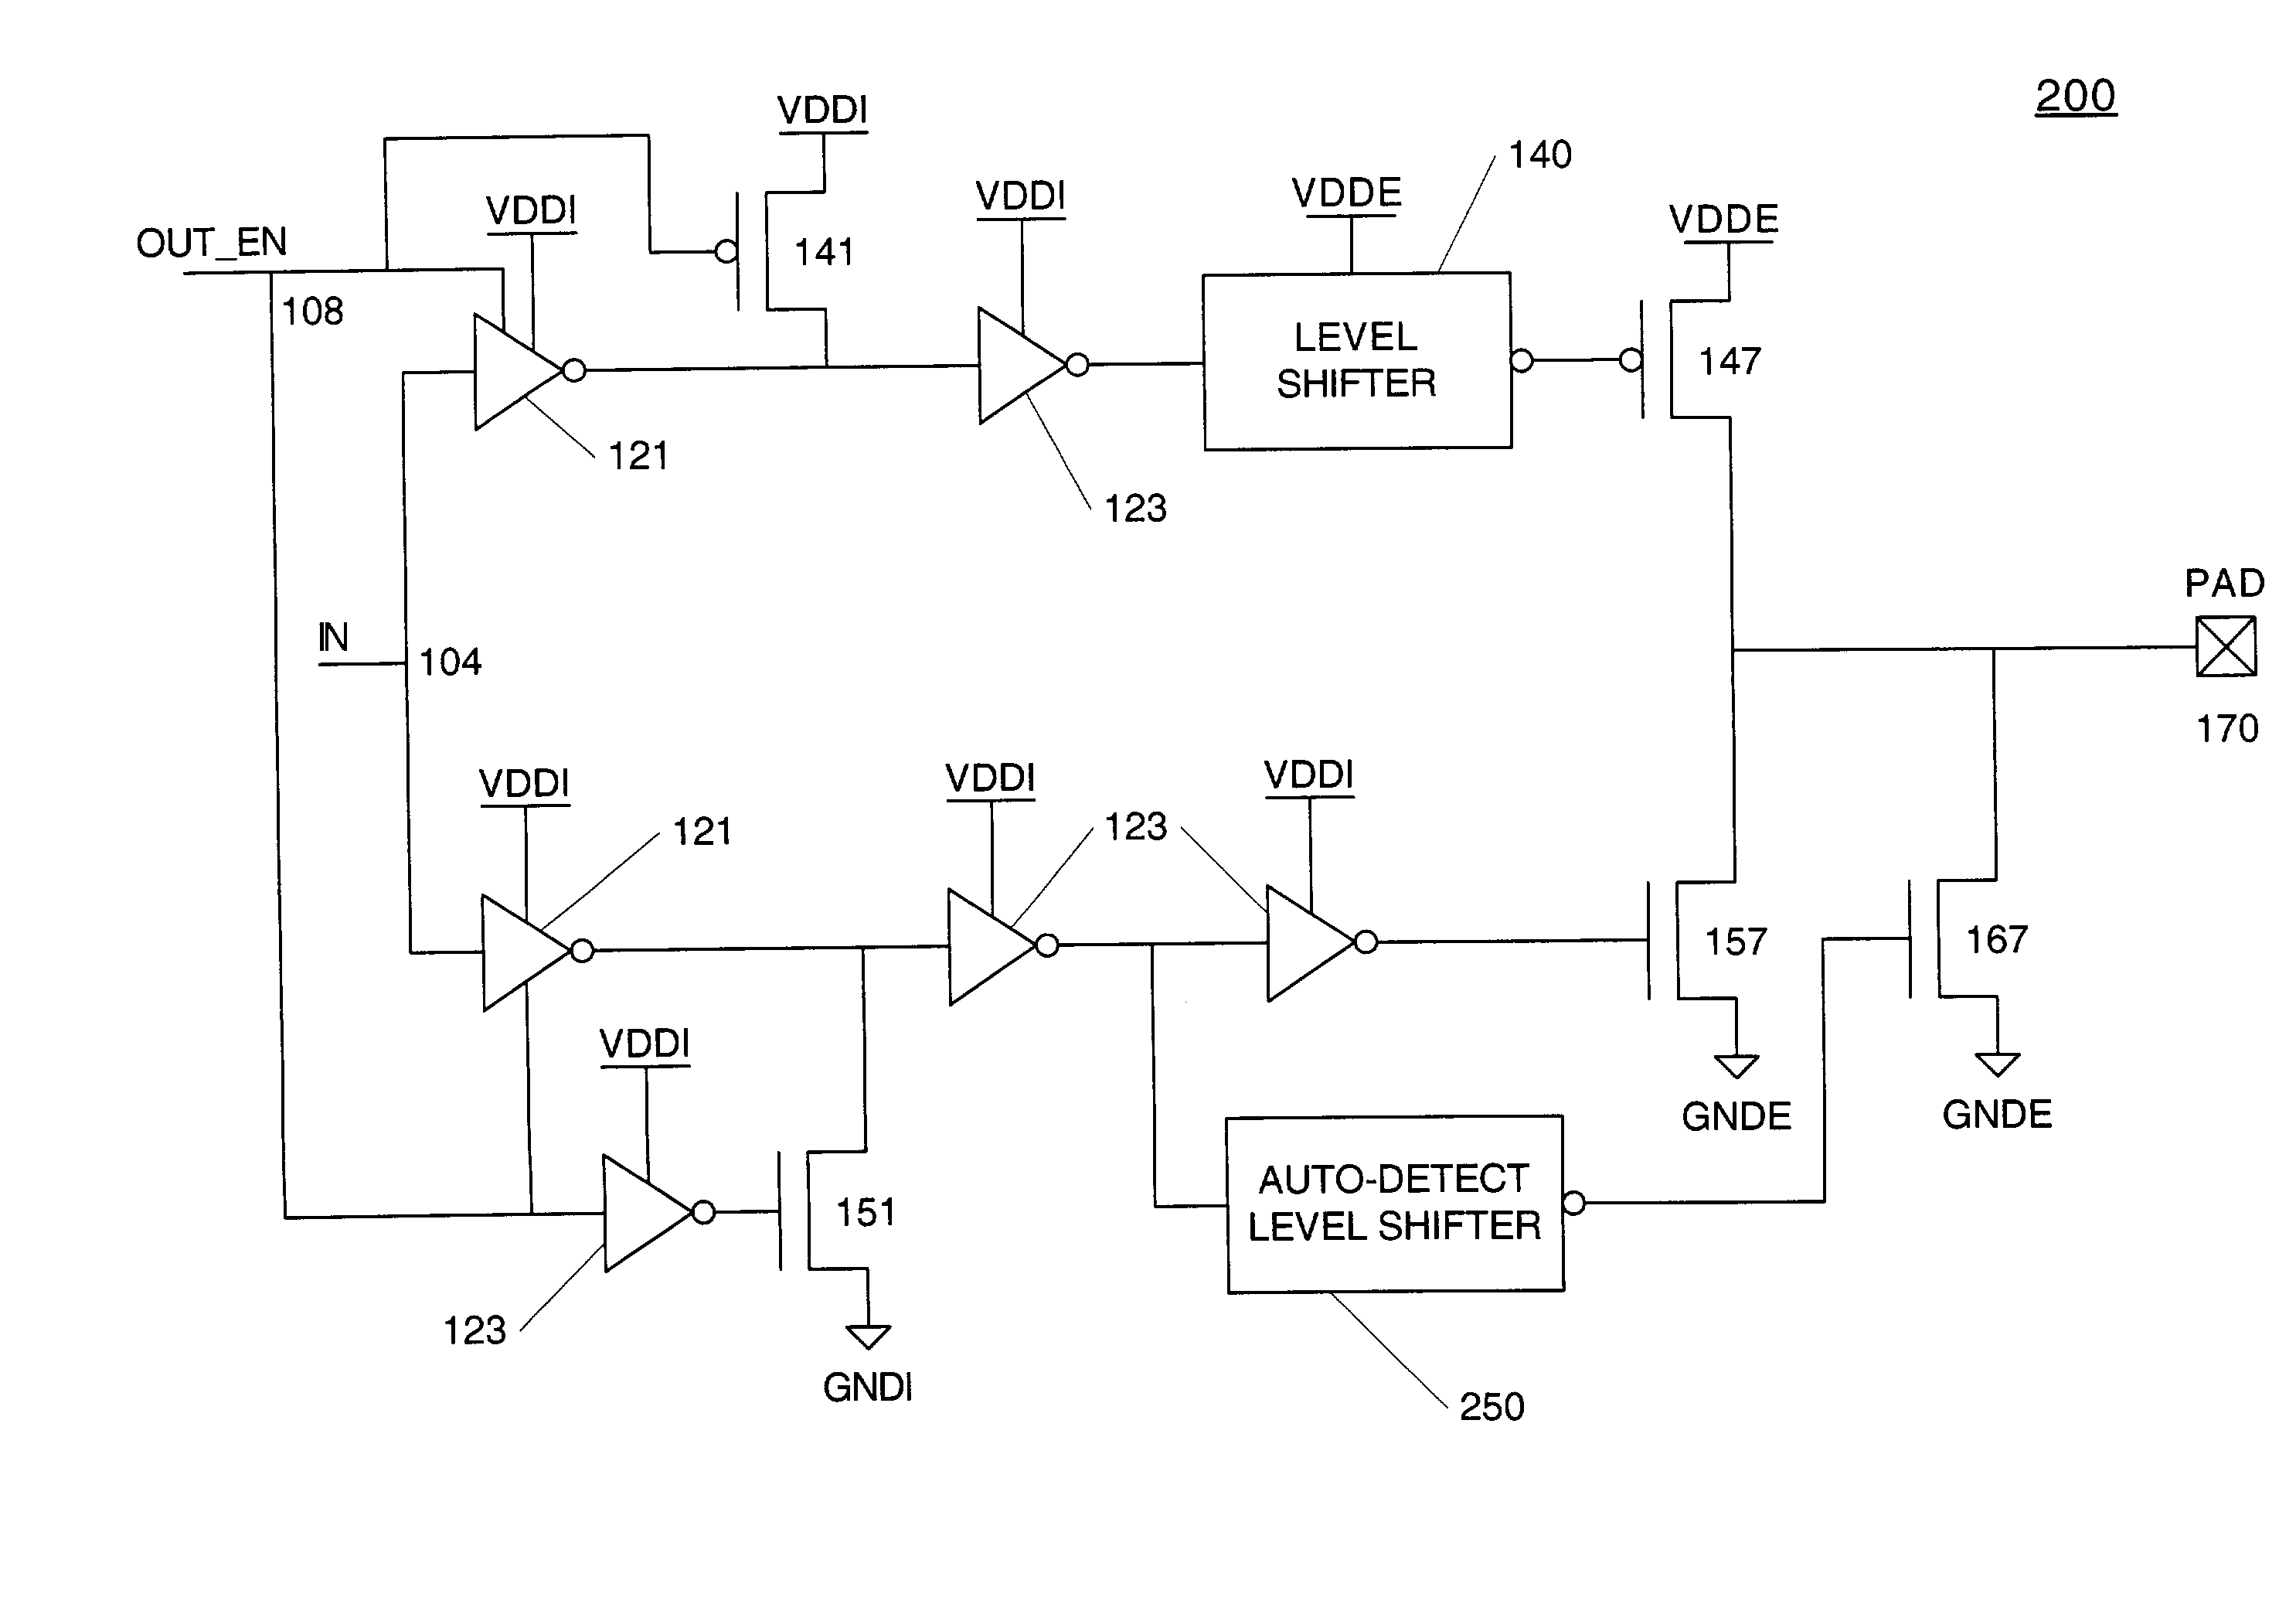 Auto-detect level shifter for multiple output voltage standards